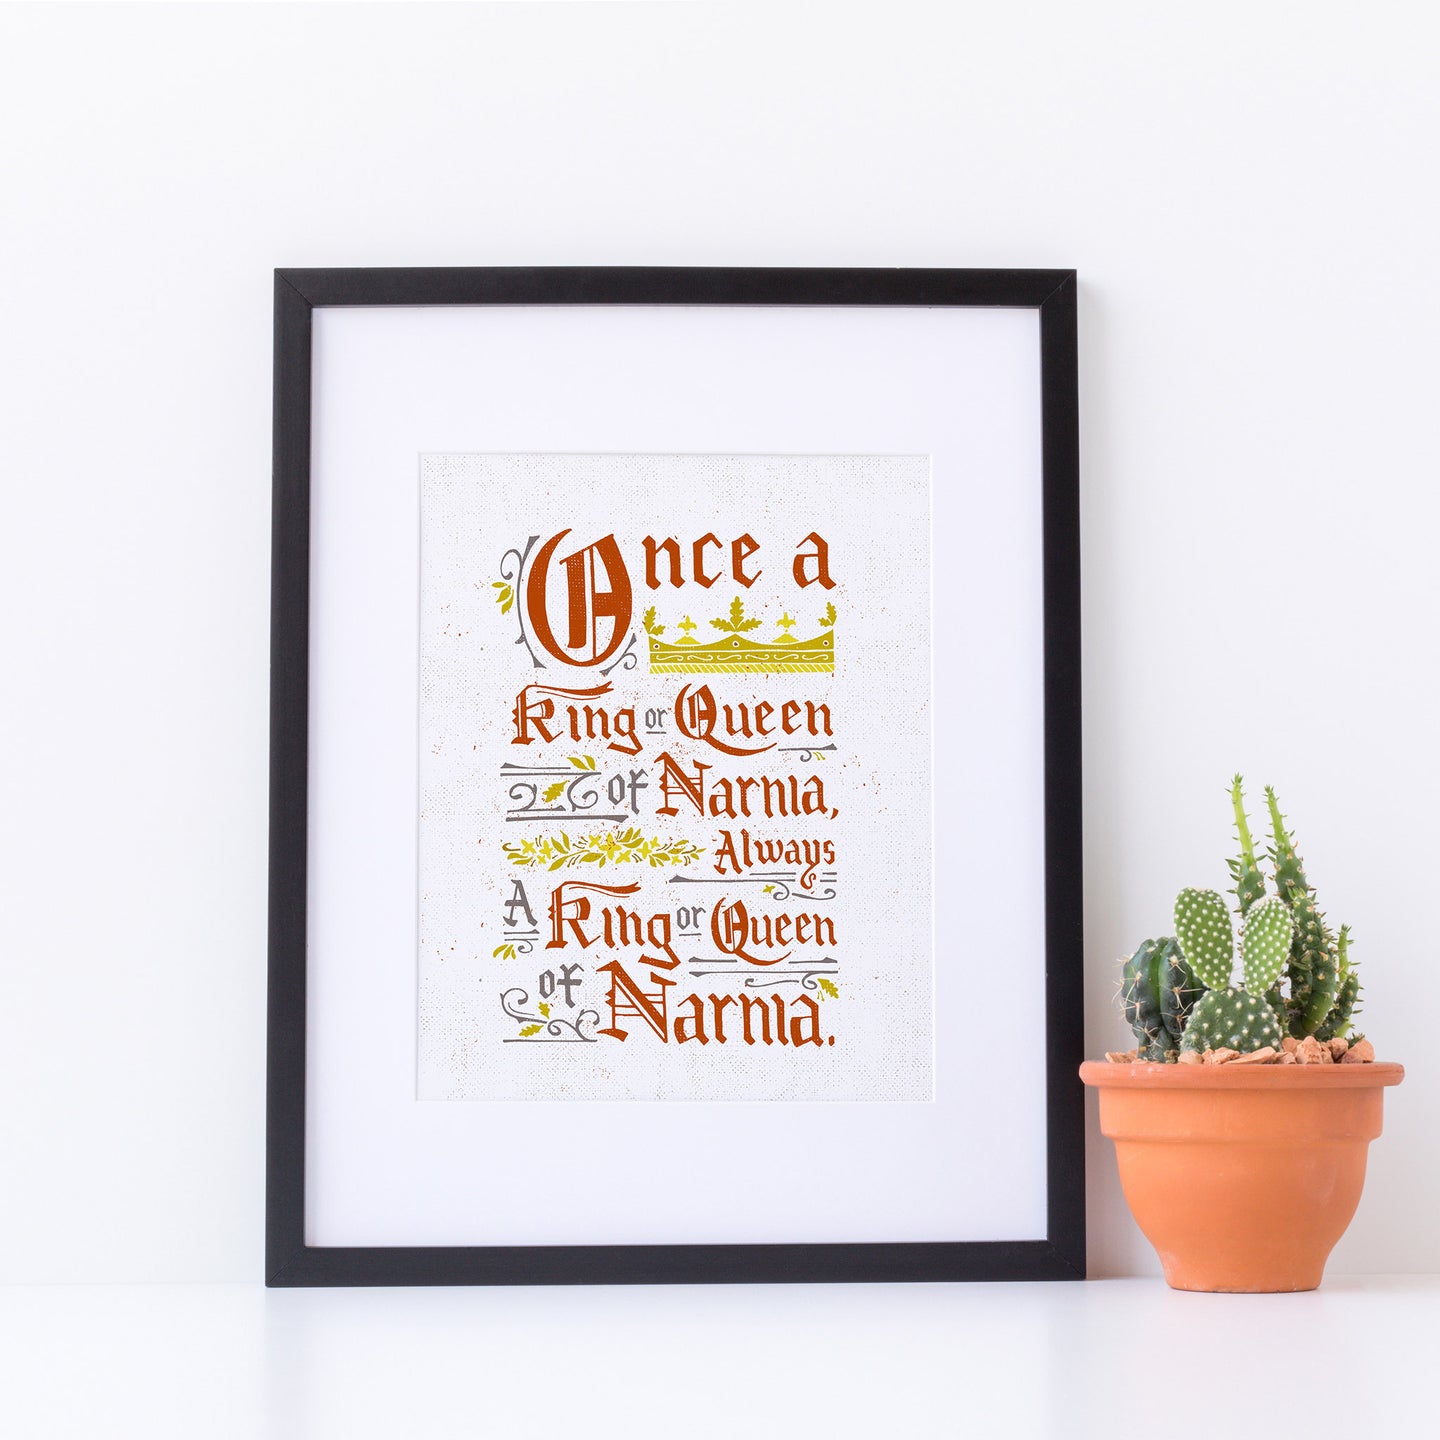 Artwork in a black frame with the with a white matte. The frame is leaning on a white counter. The artwork features hand drawn lettering of the Narnia quote 